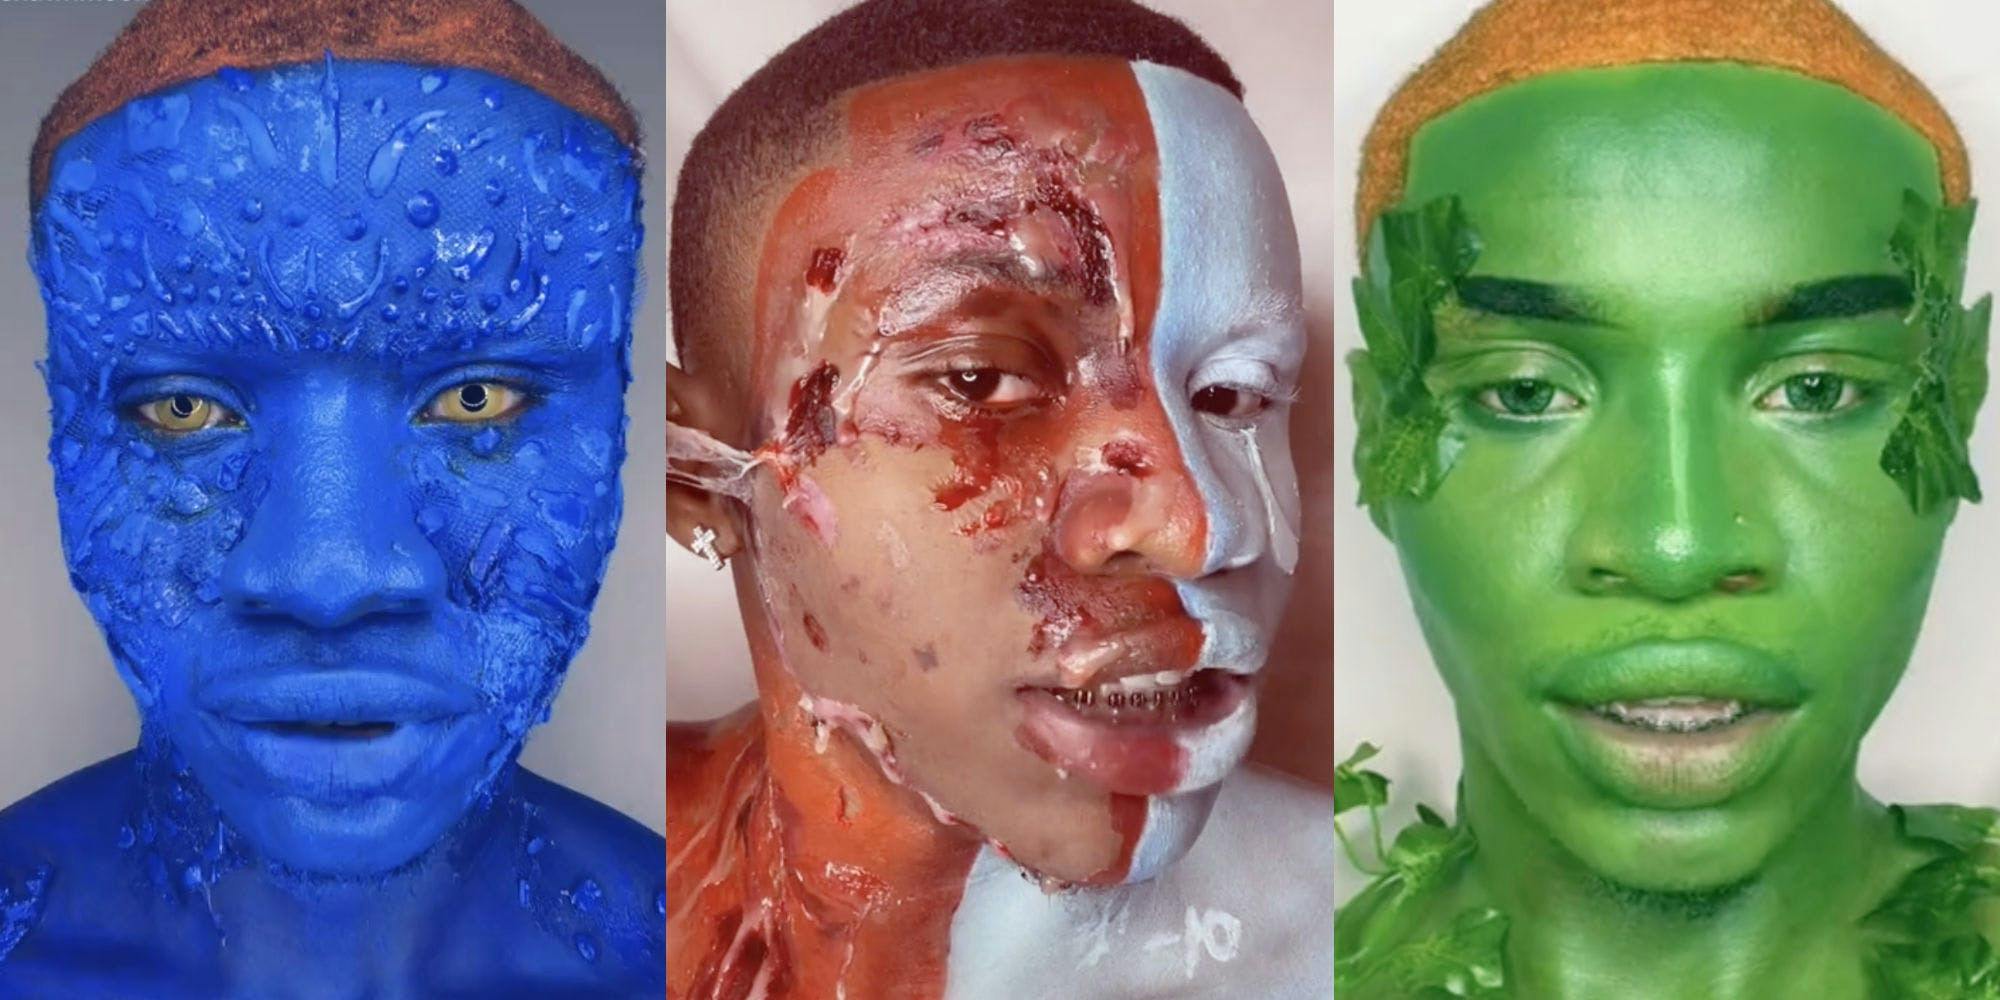 Dashawn Moon’s Special Effects Makeup Videos Earned the TikToker Over 6 Million Followers